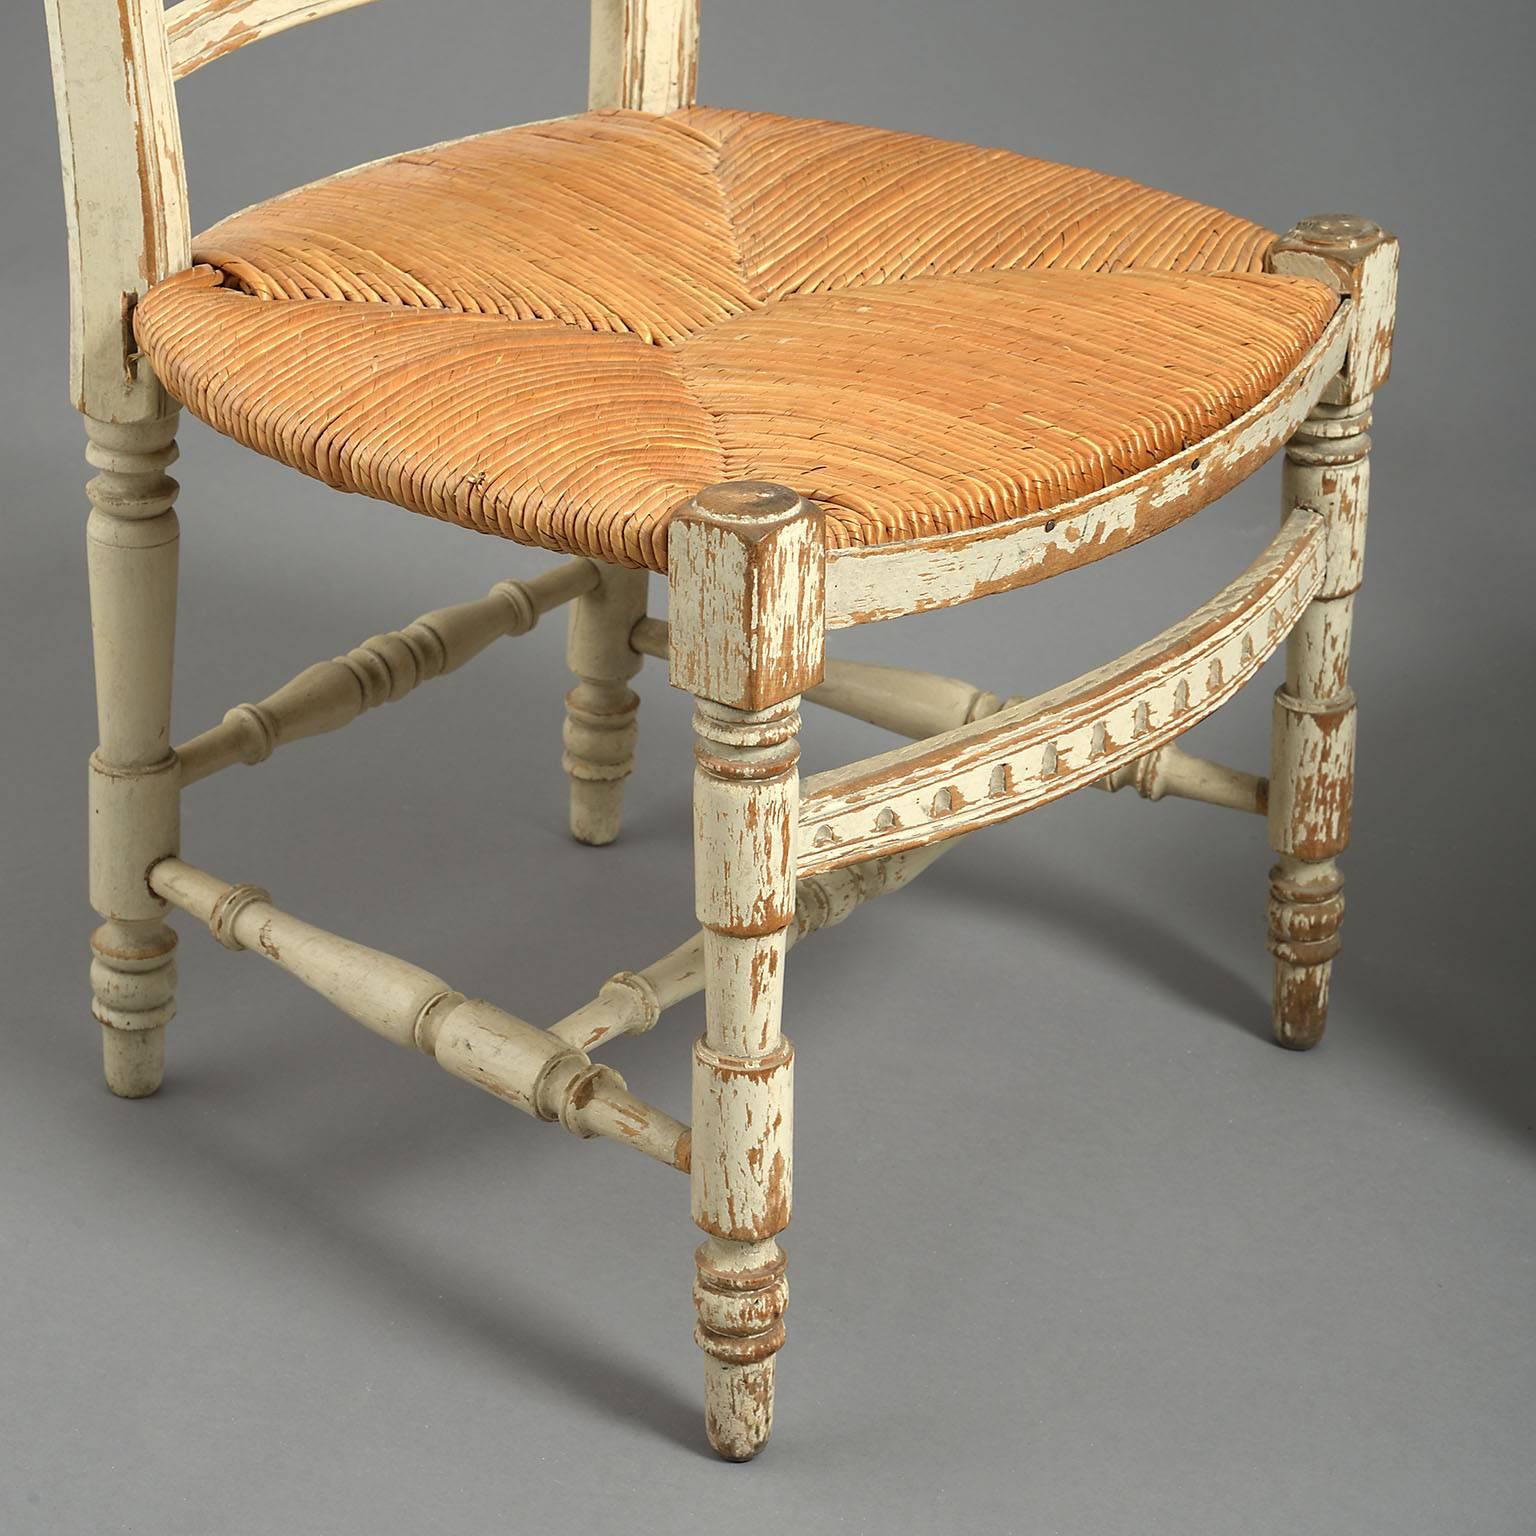 The high backs with acorn finials and stylized wheat-sheaf splat leading down to a low rush seats with turned legs and H-stretchers.



 